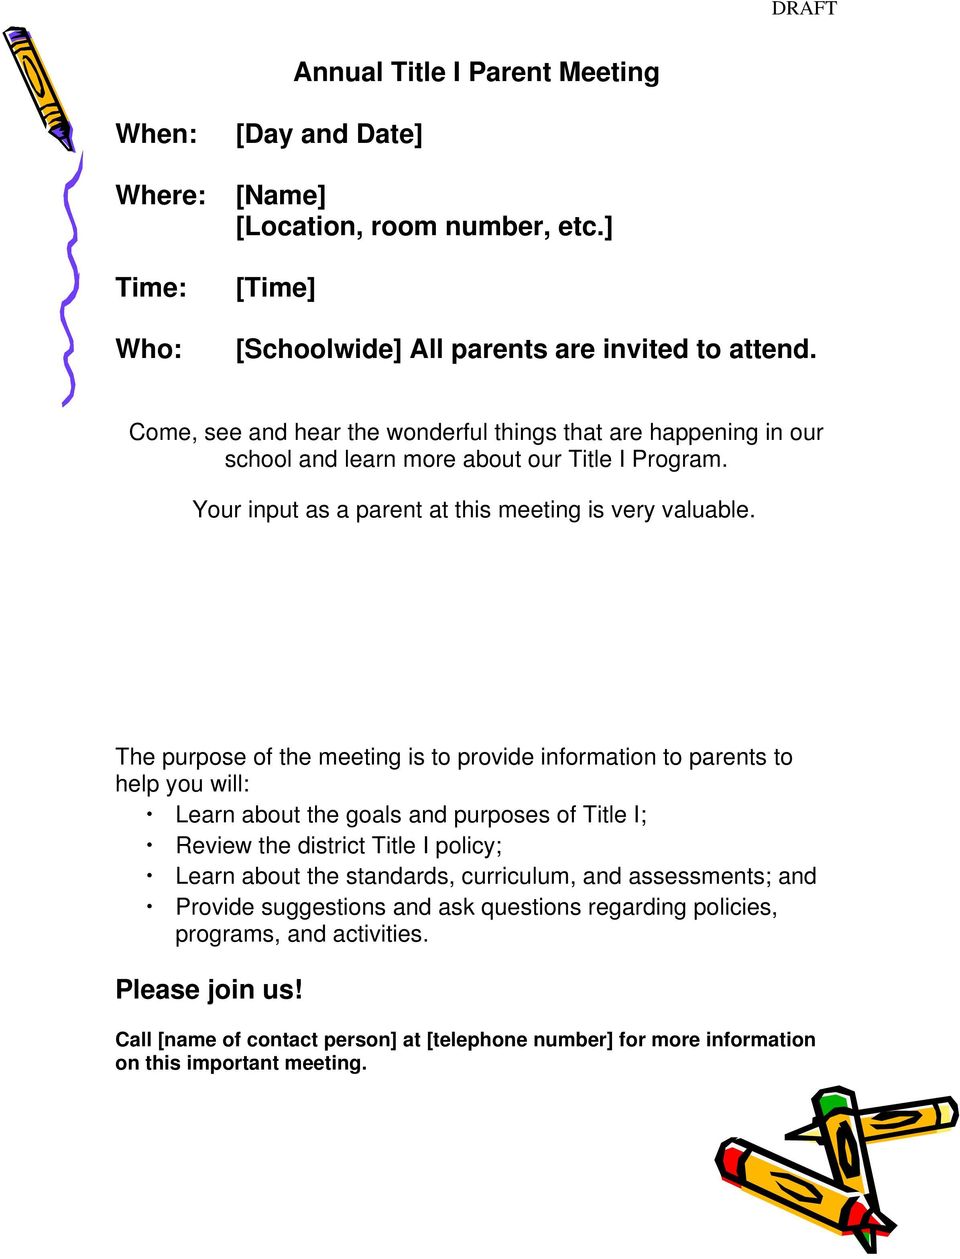 The purpose of the meeting is to provide information to parents to help you will: Learn about the goals and purposes of Title I; Review the district Title I policy; Learn about the